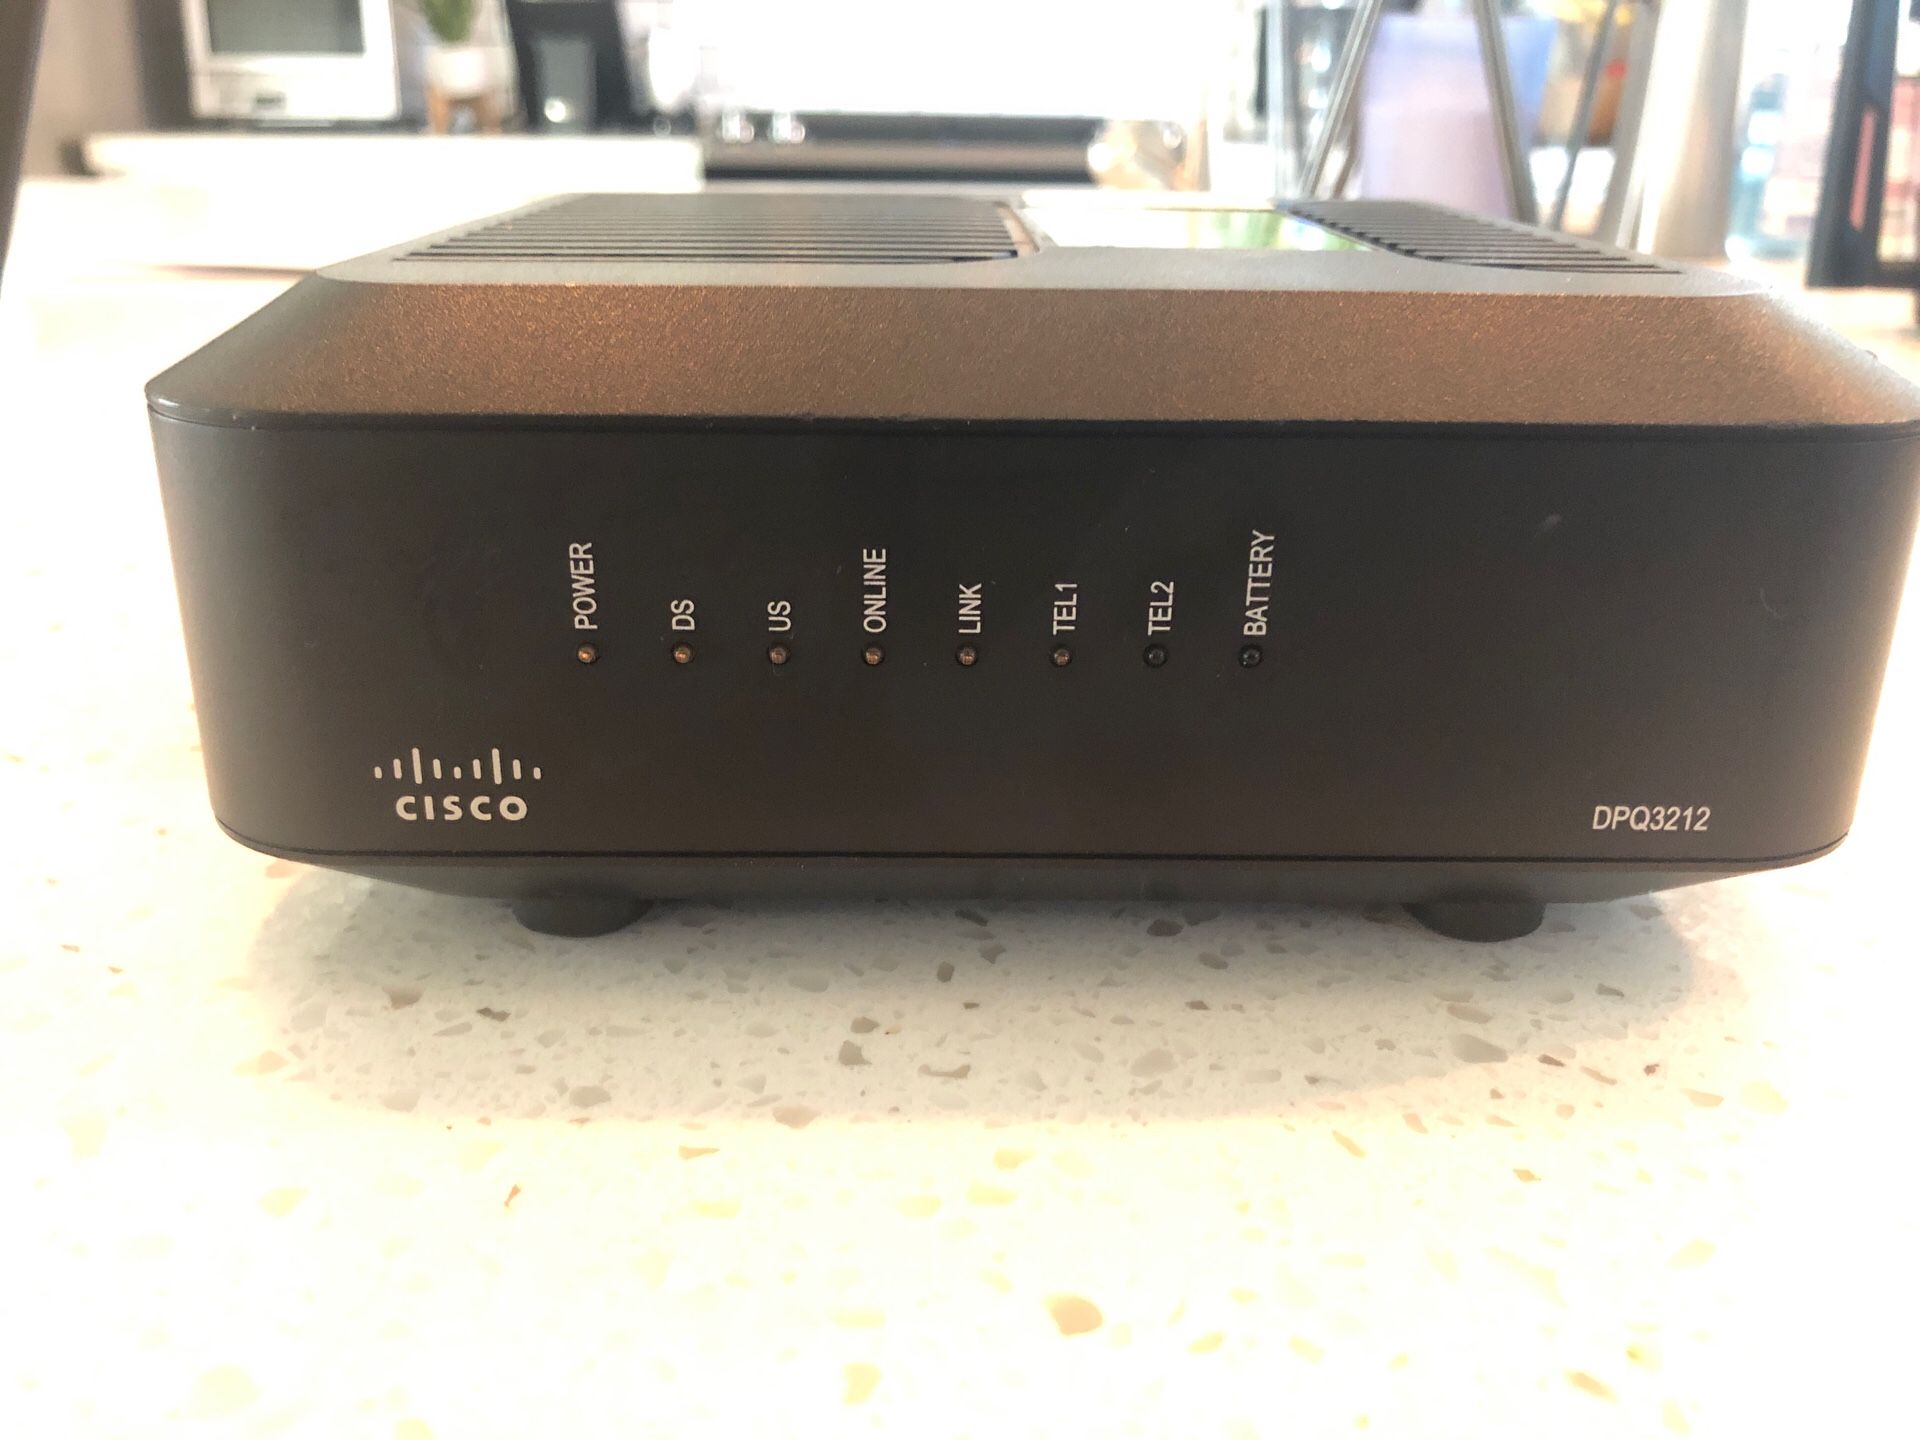 Cisco Cable Modem w/Battery Backup - DPQ3212